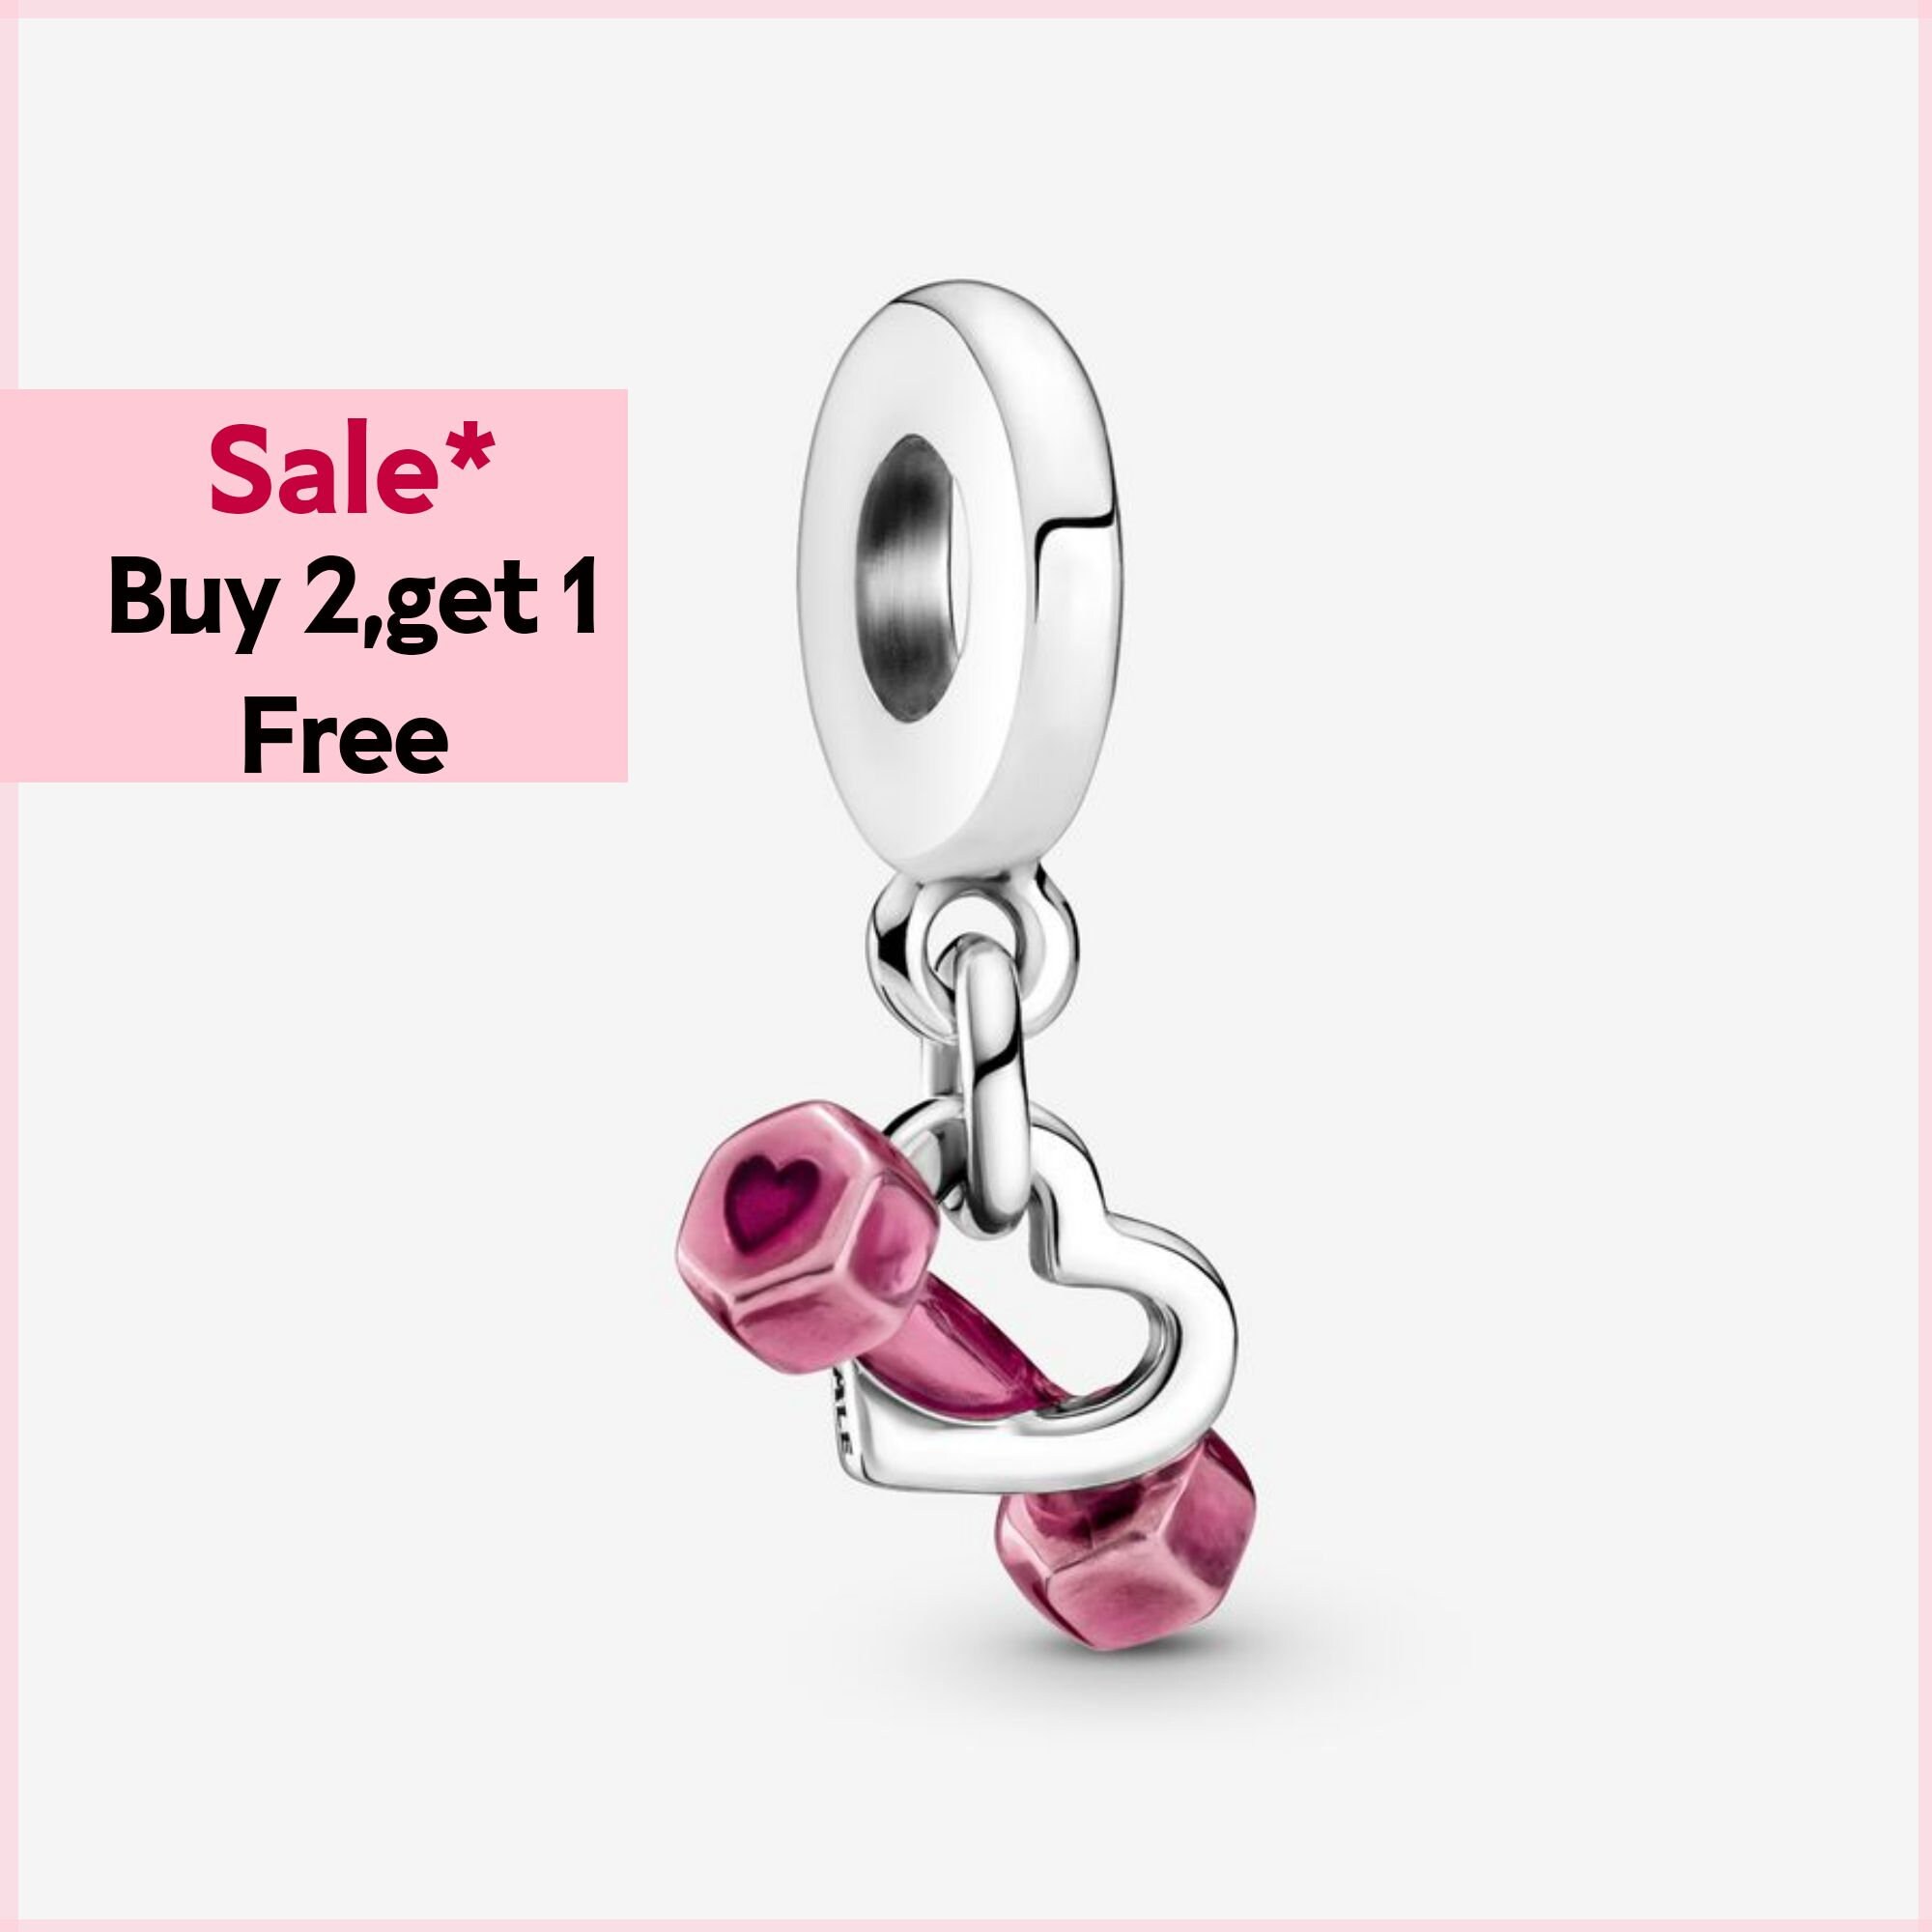 CLEARANCE Crystal Heart Charms Package of 5 Beautifully Cut With